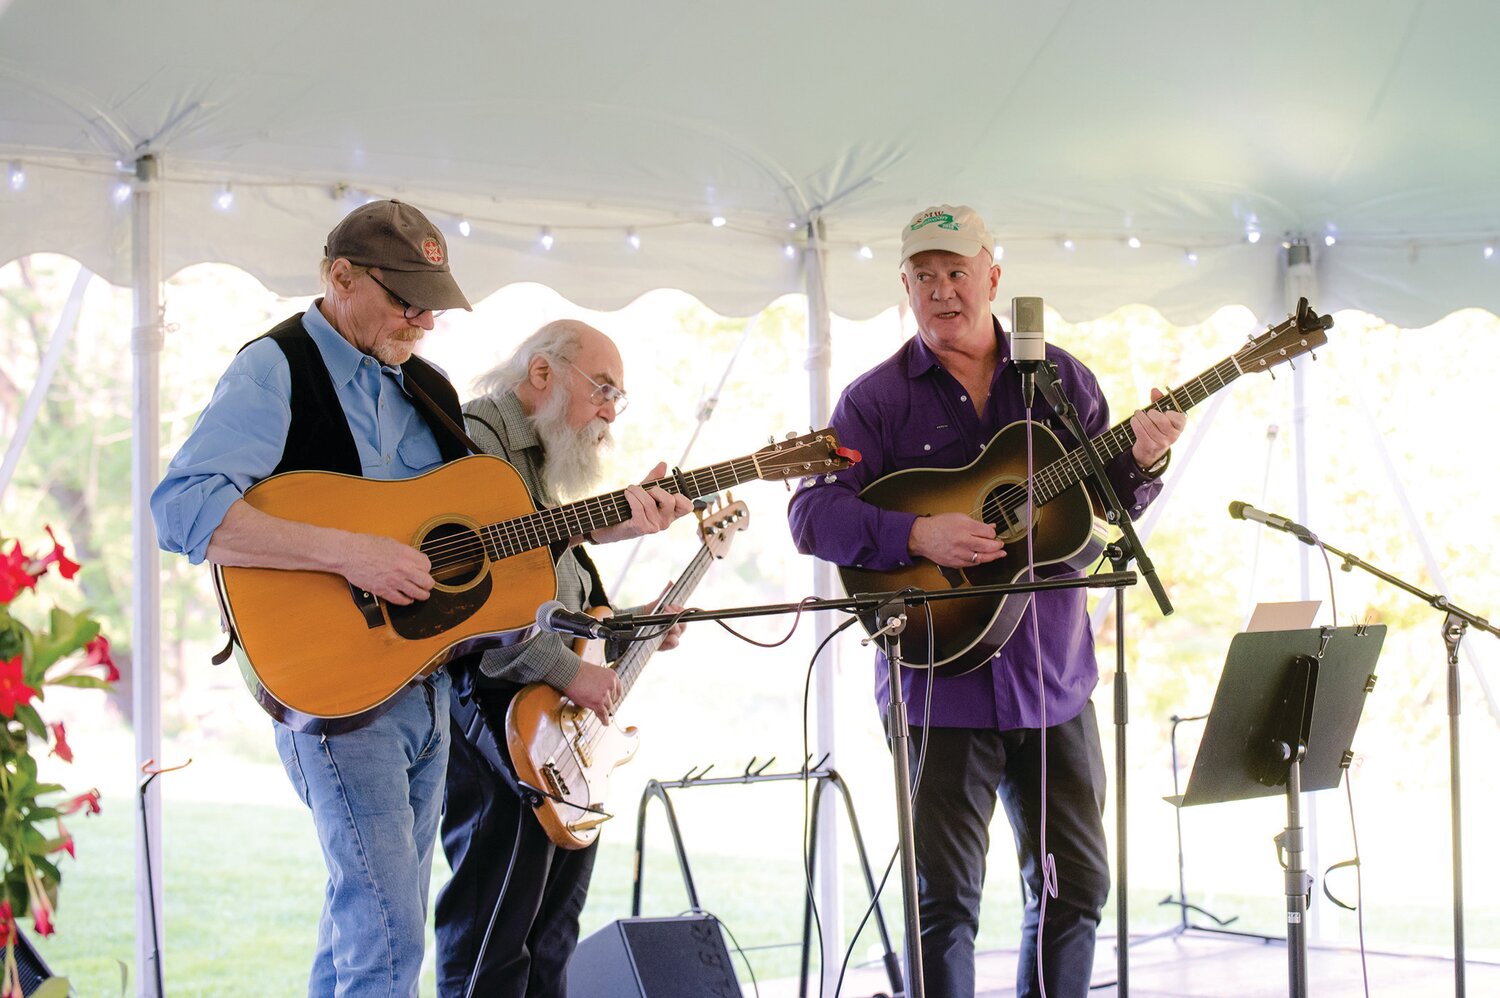 Mark Cosgrove, Class of 1974, right, leads the trio at Solebury School’s recent outdoor celebration.